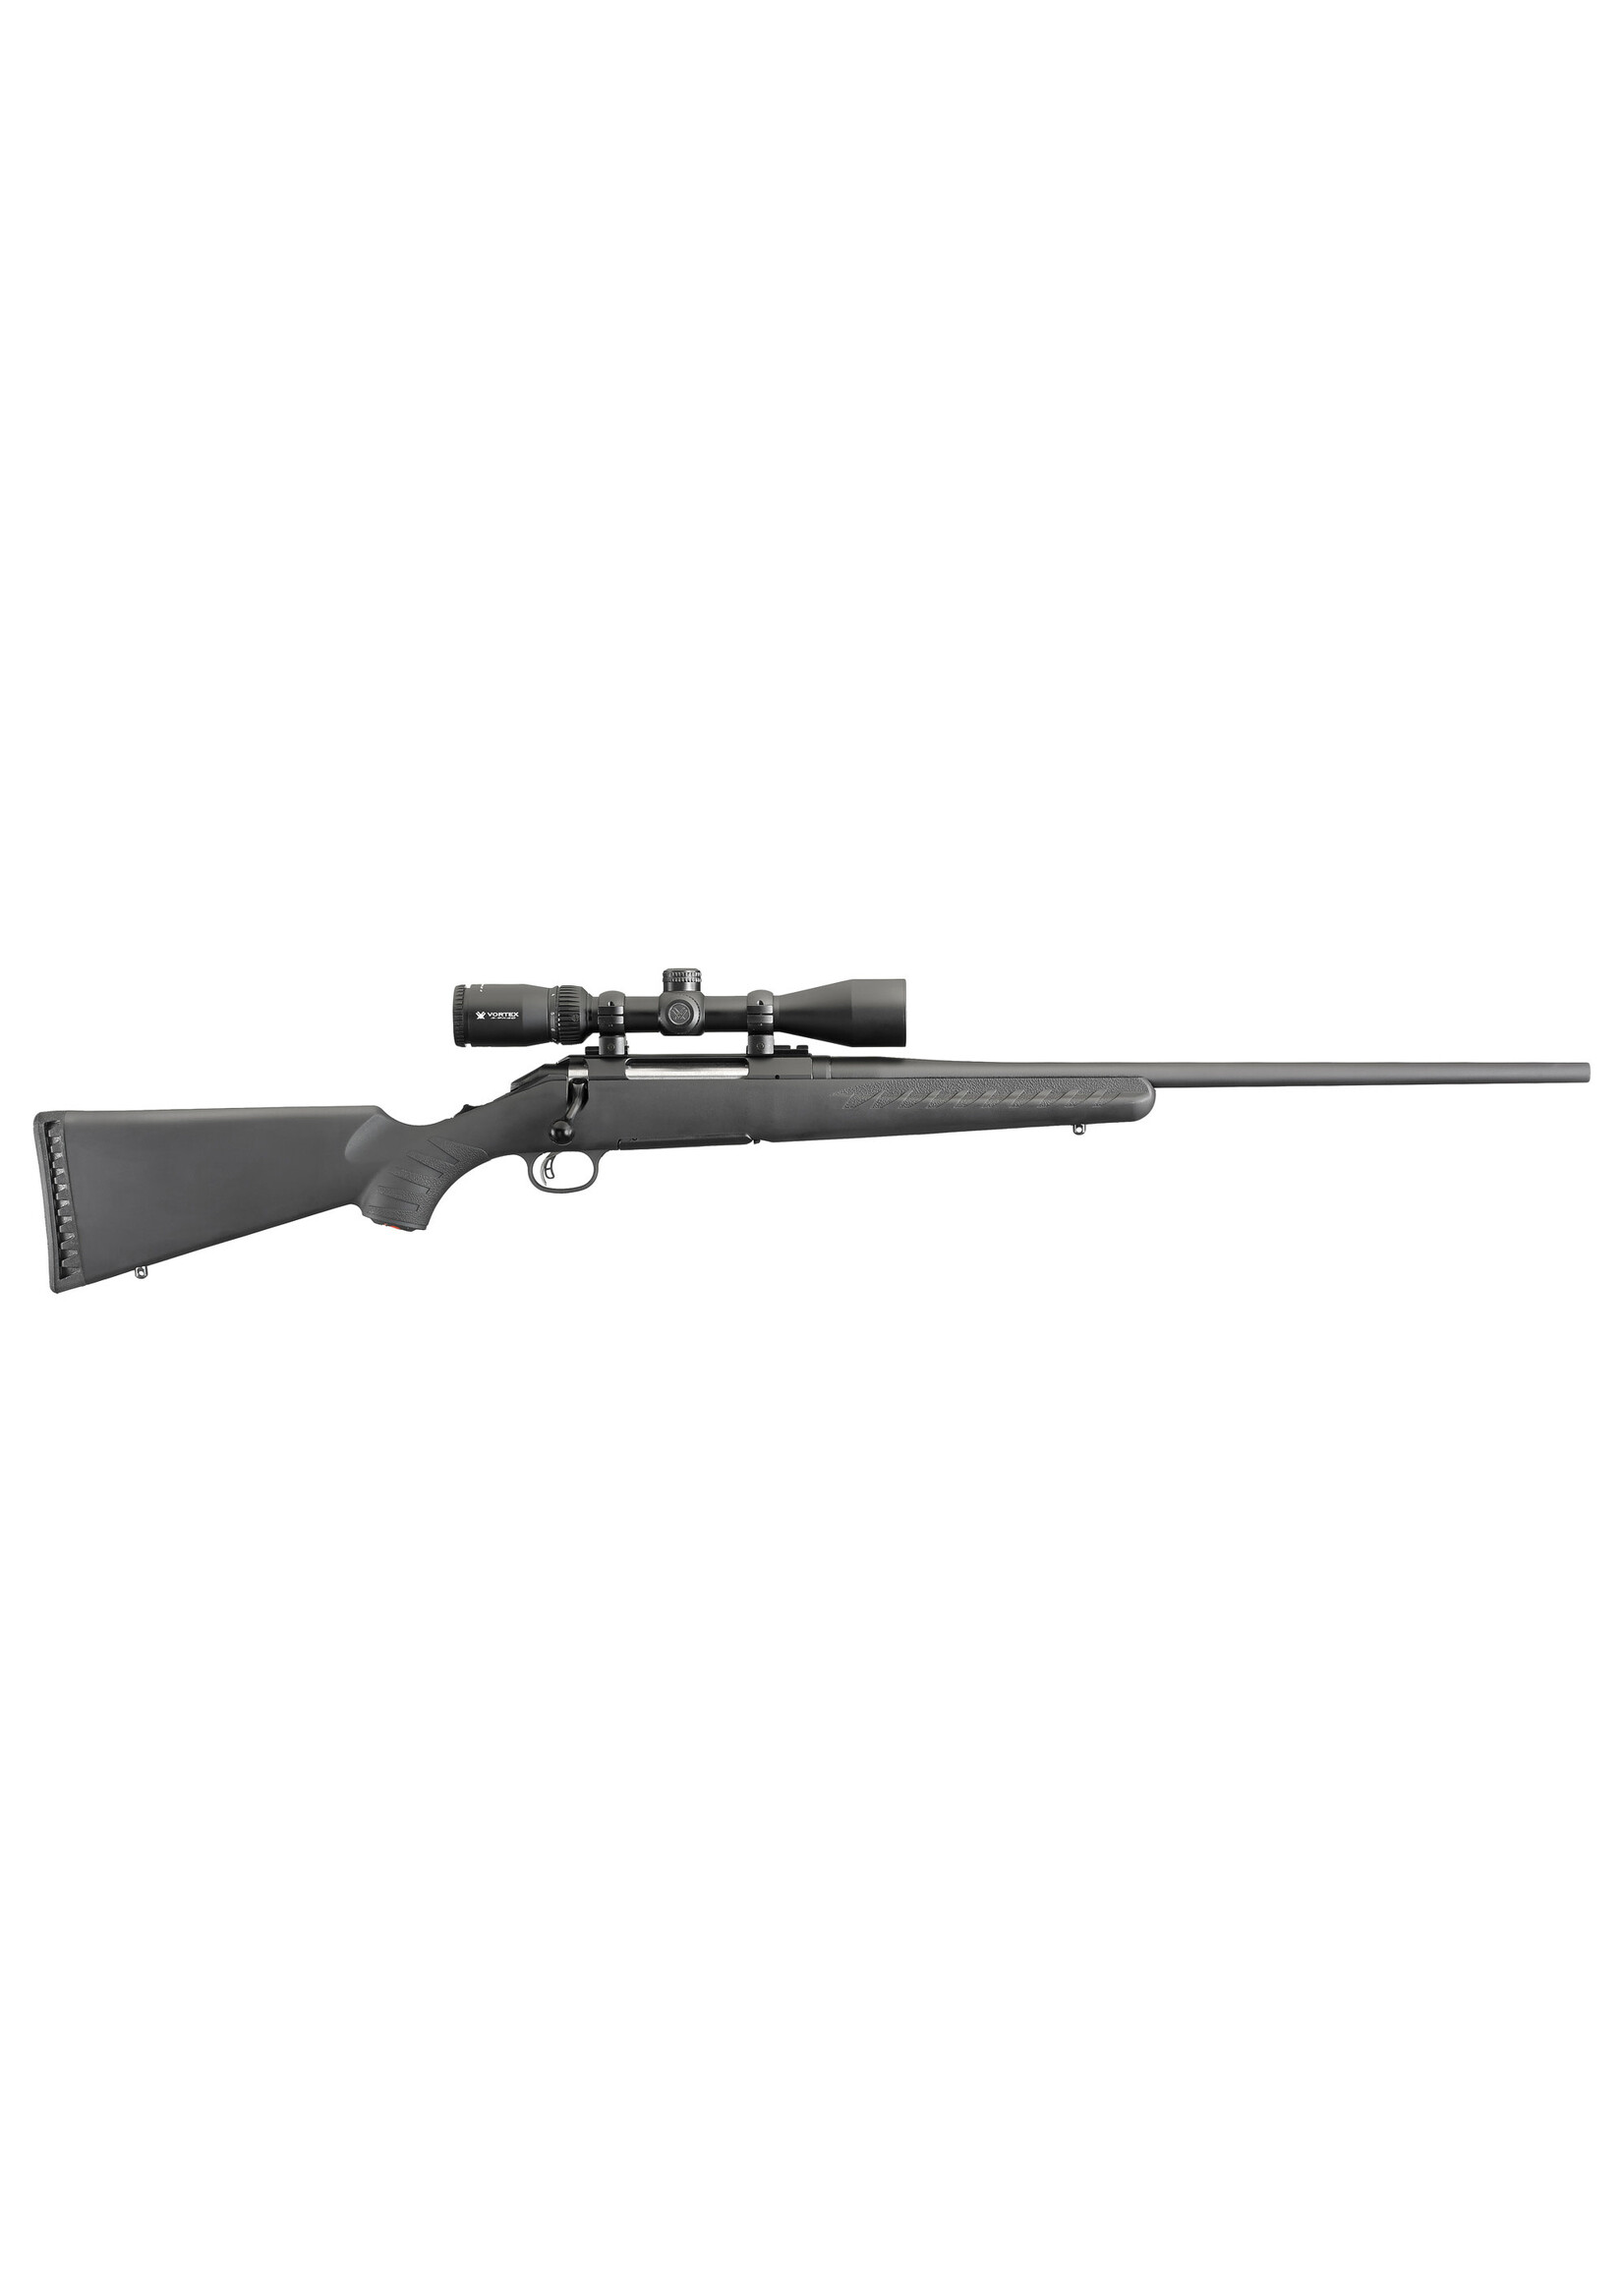 Ruger Ruger, American, Bolt-Action Rifle, 30-06 Springfield, 22" Barrel, Matte Finish, Synthetic Stock, Black, with Vortex Crossfire II, 3-9X40 BDC Reticle, 1 Magazine, 4 Rounds, Right Hand